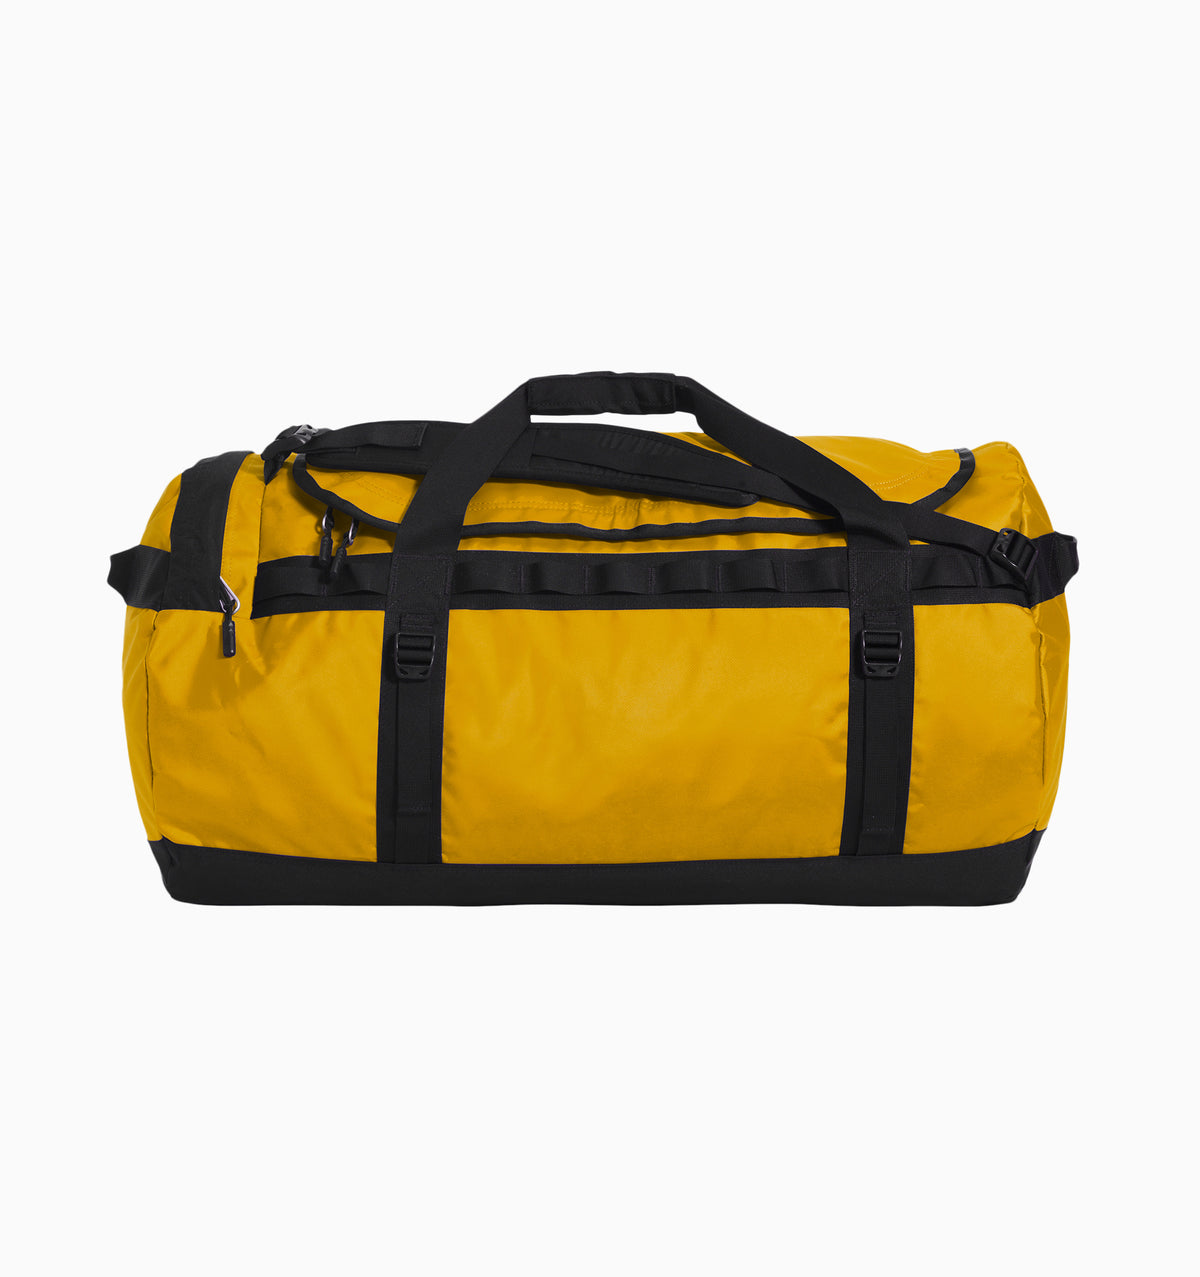 The North Face Large Base Camp Duffle 95L - 2022 Edition - Summit Gold